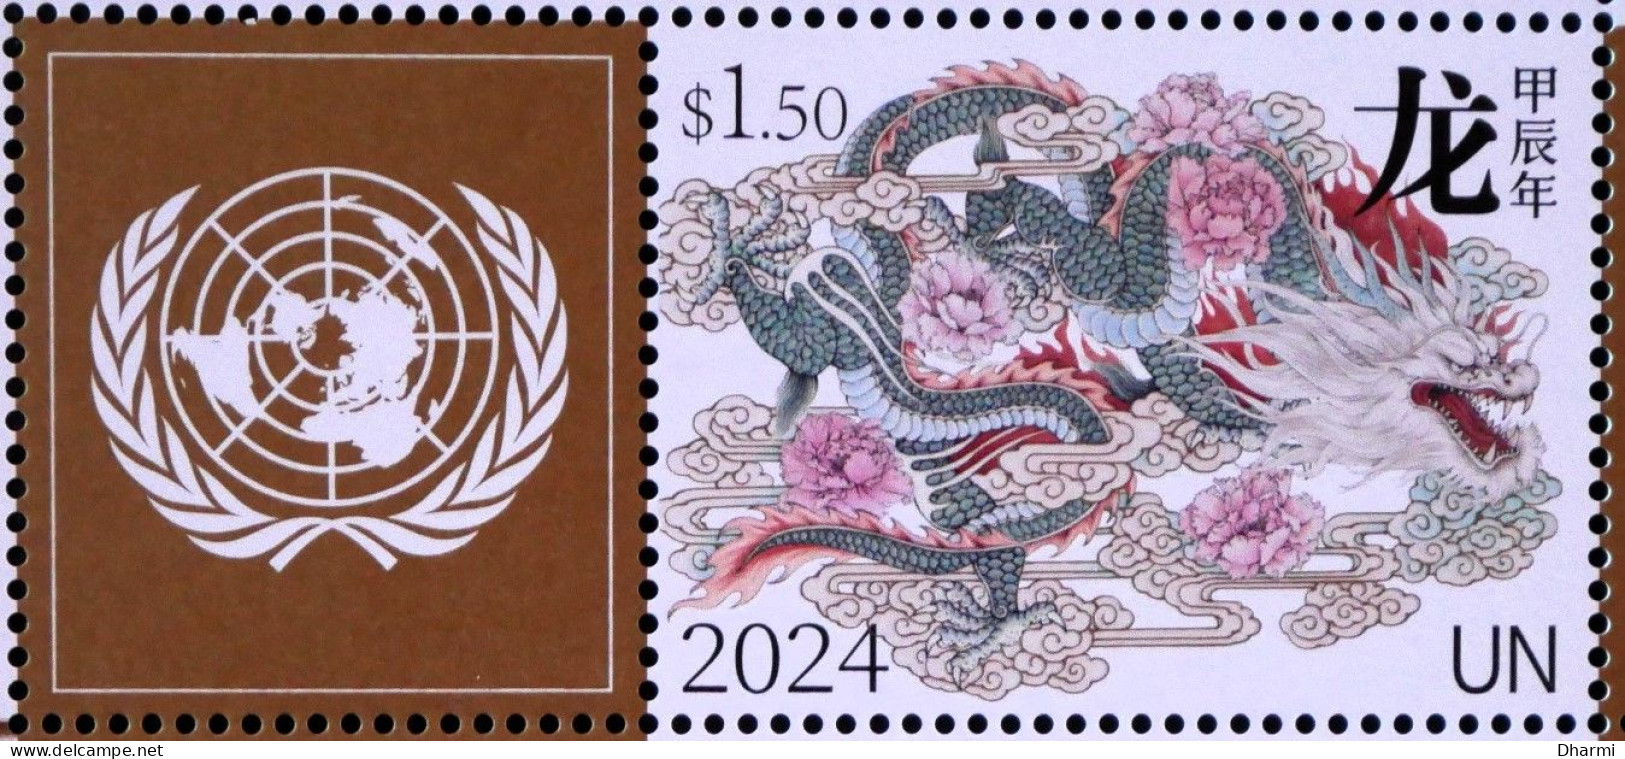 ONU - UNITED NATIONS 2024 - NATIONS UNIES - NEUF** 1TD - LUNAR YEAR OF THE DRAGON - ANNEE LUNAIRE DU DRAGON - MNH - Nuovi